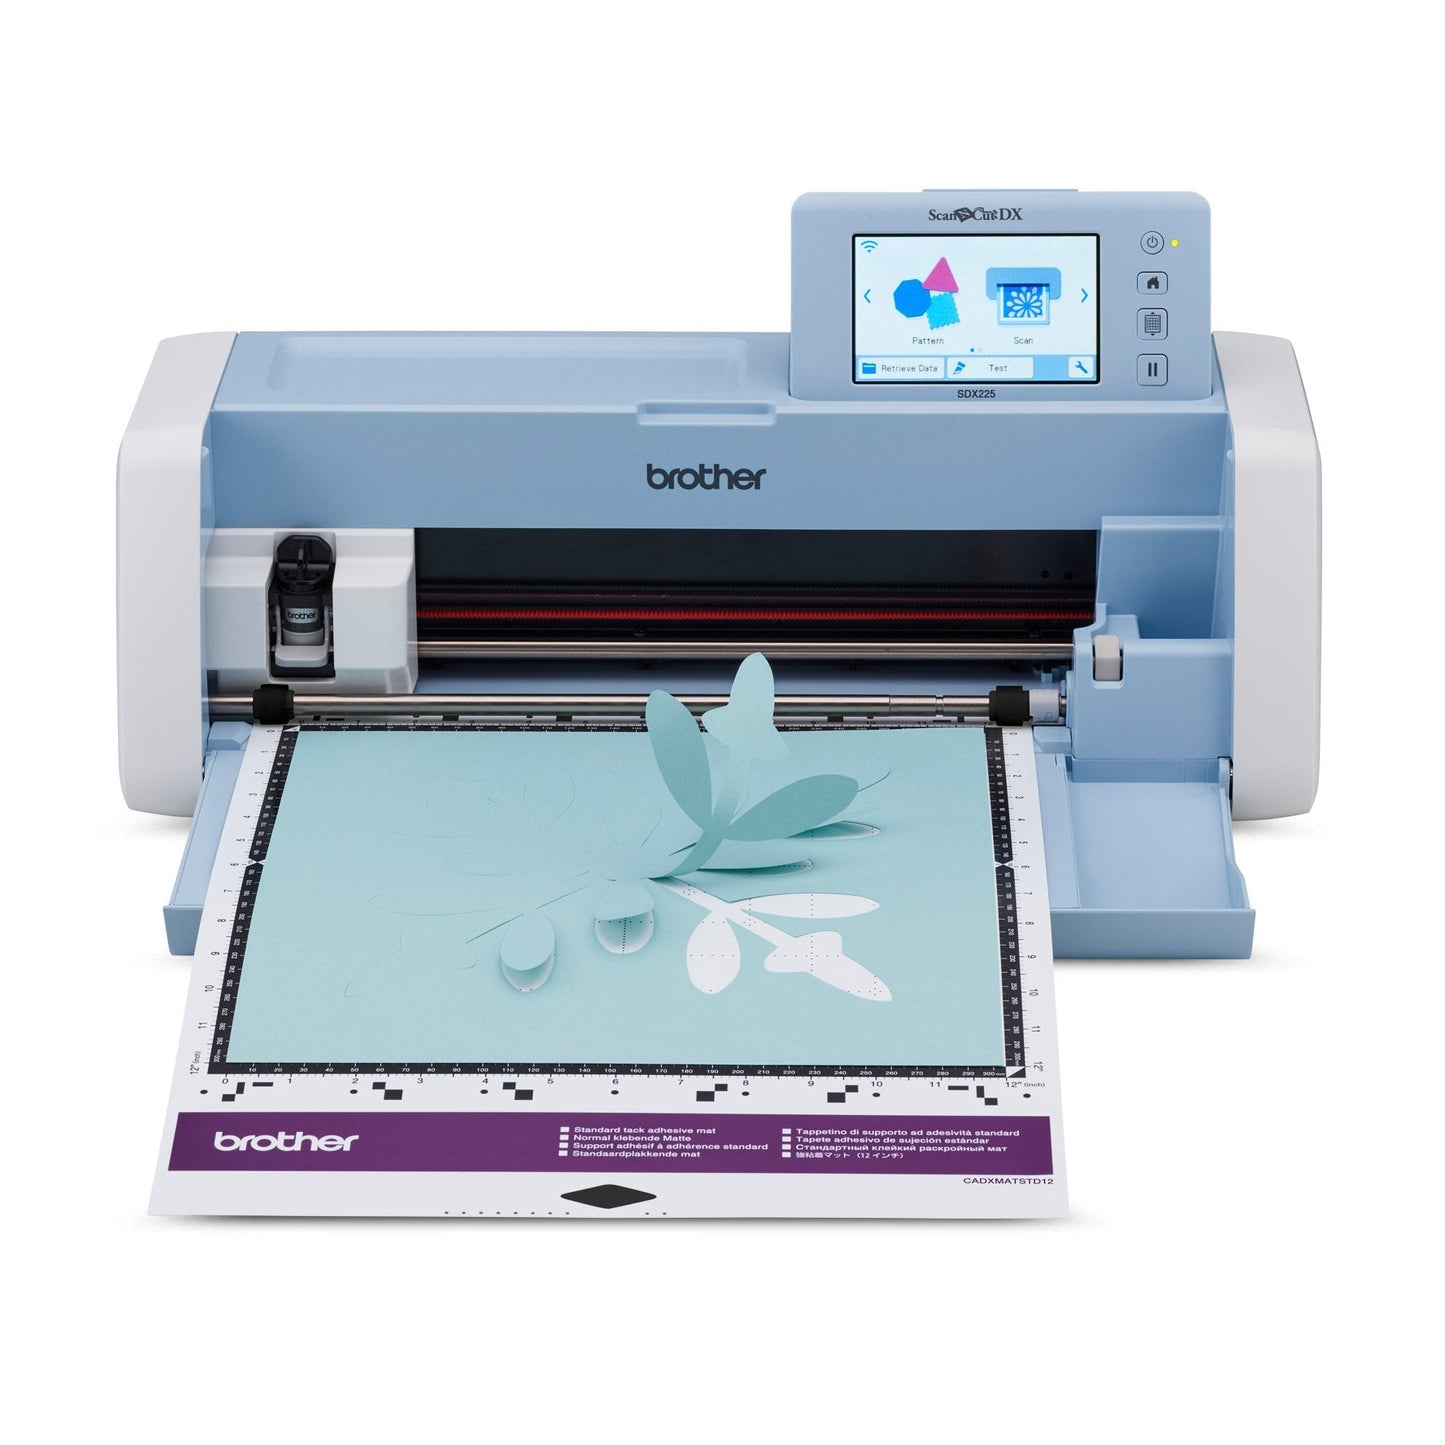 Brother SDX325 ScanNCut DX Innov-ís Edition - Precision Cutting, Built-In Scanner, Wireless Connectivity